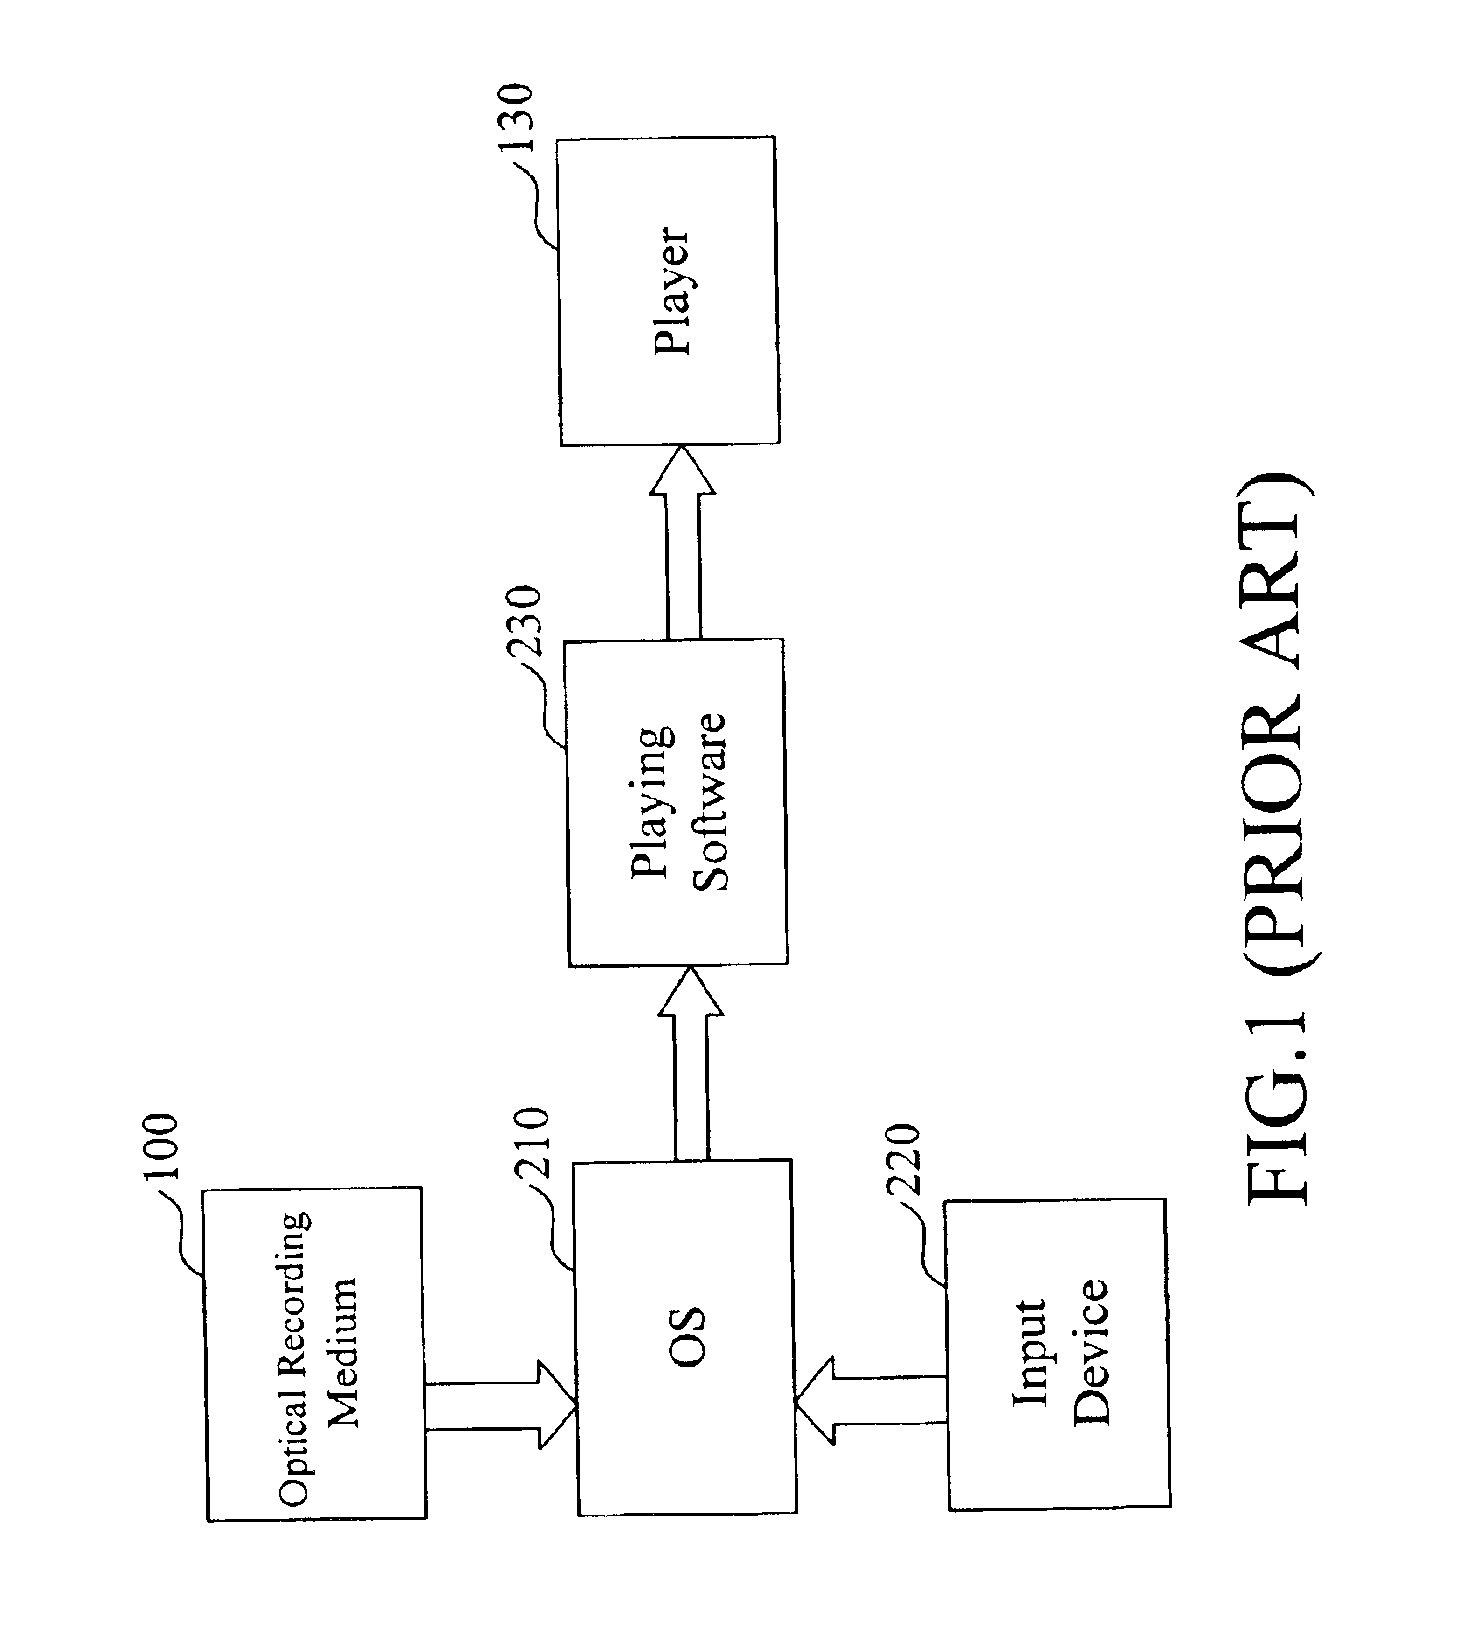 Method and device for playing multimedia files in semi-power on state of a computer